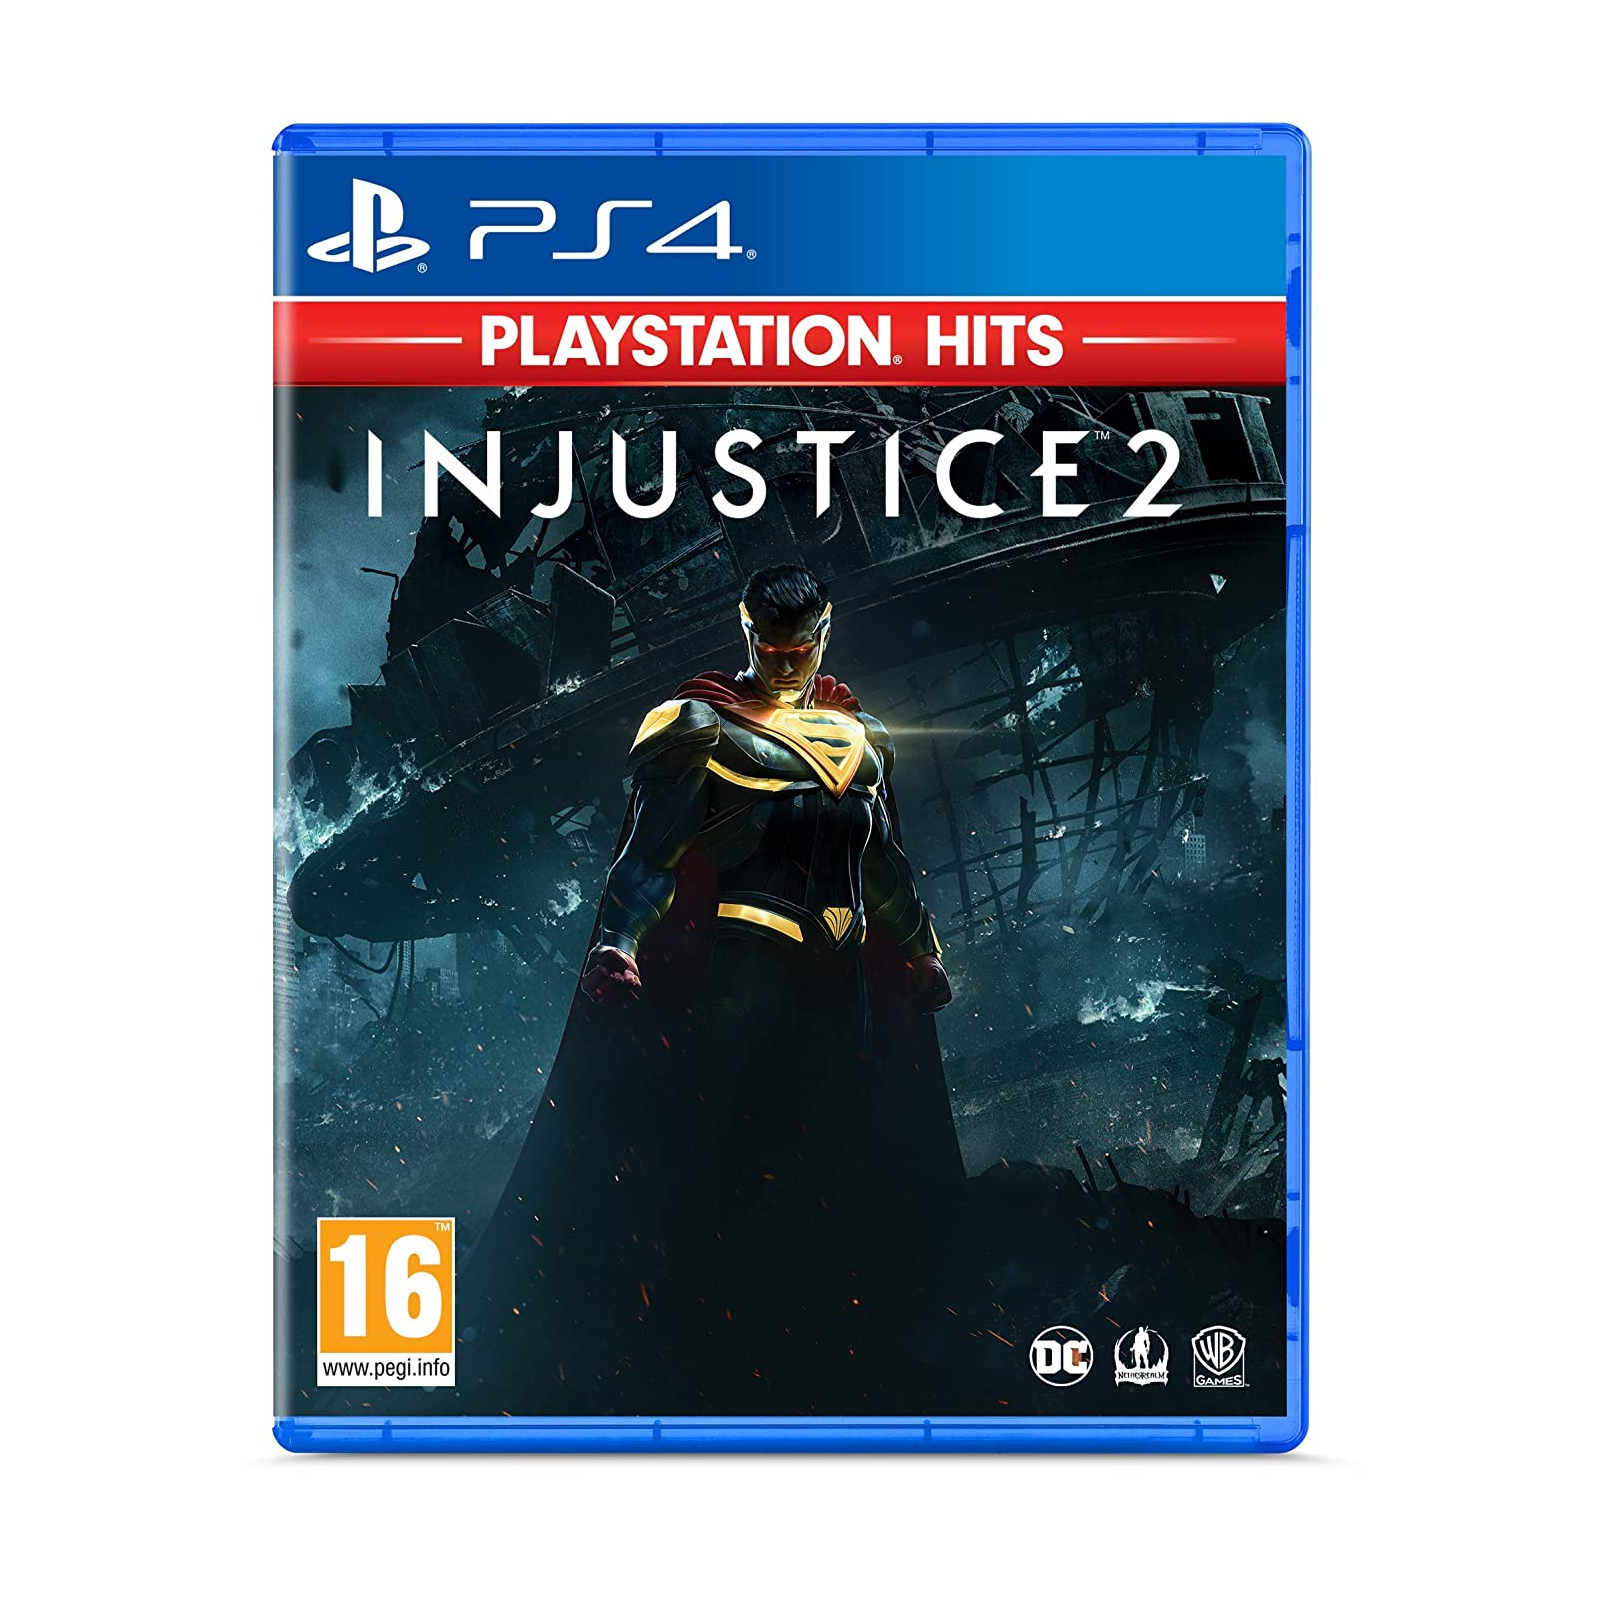 Игра Sony Injustice 2 (PlayStation Hits), BD диск (5051890322043)